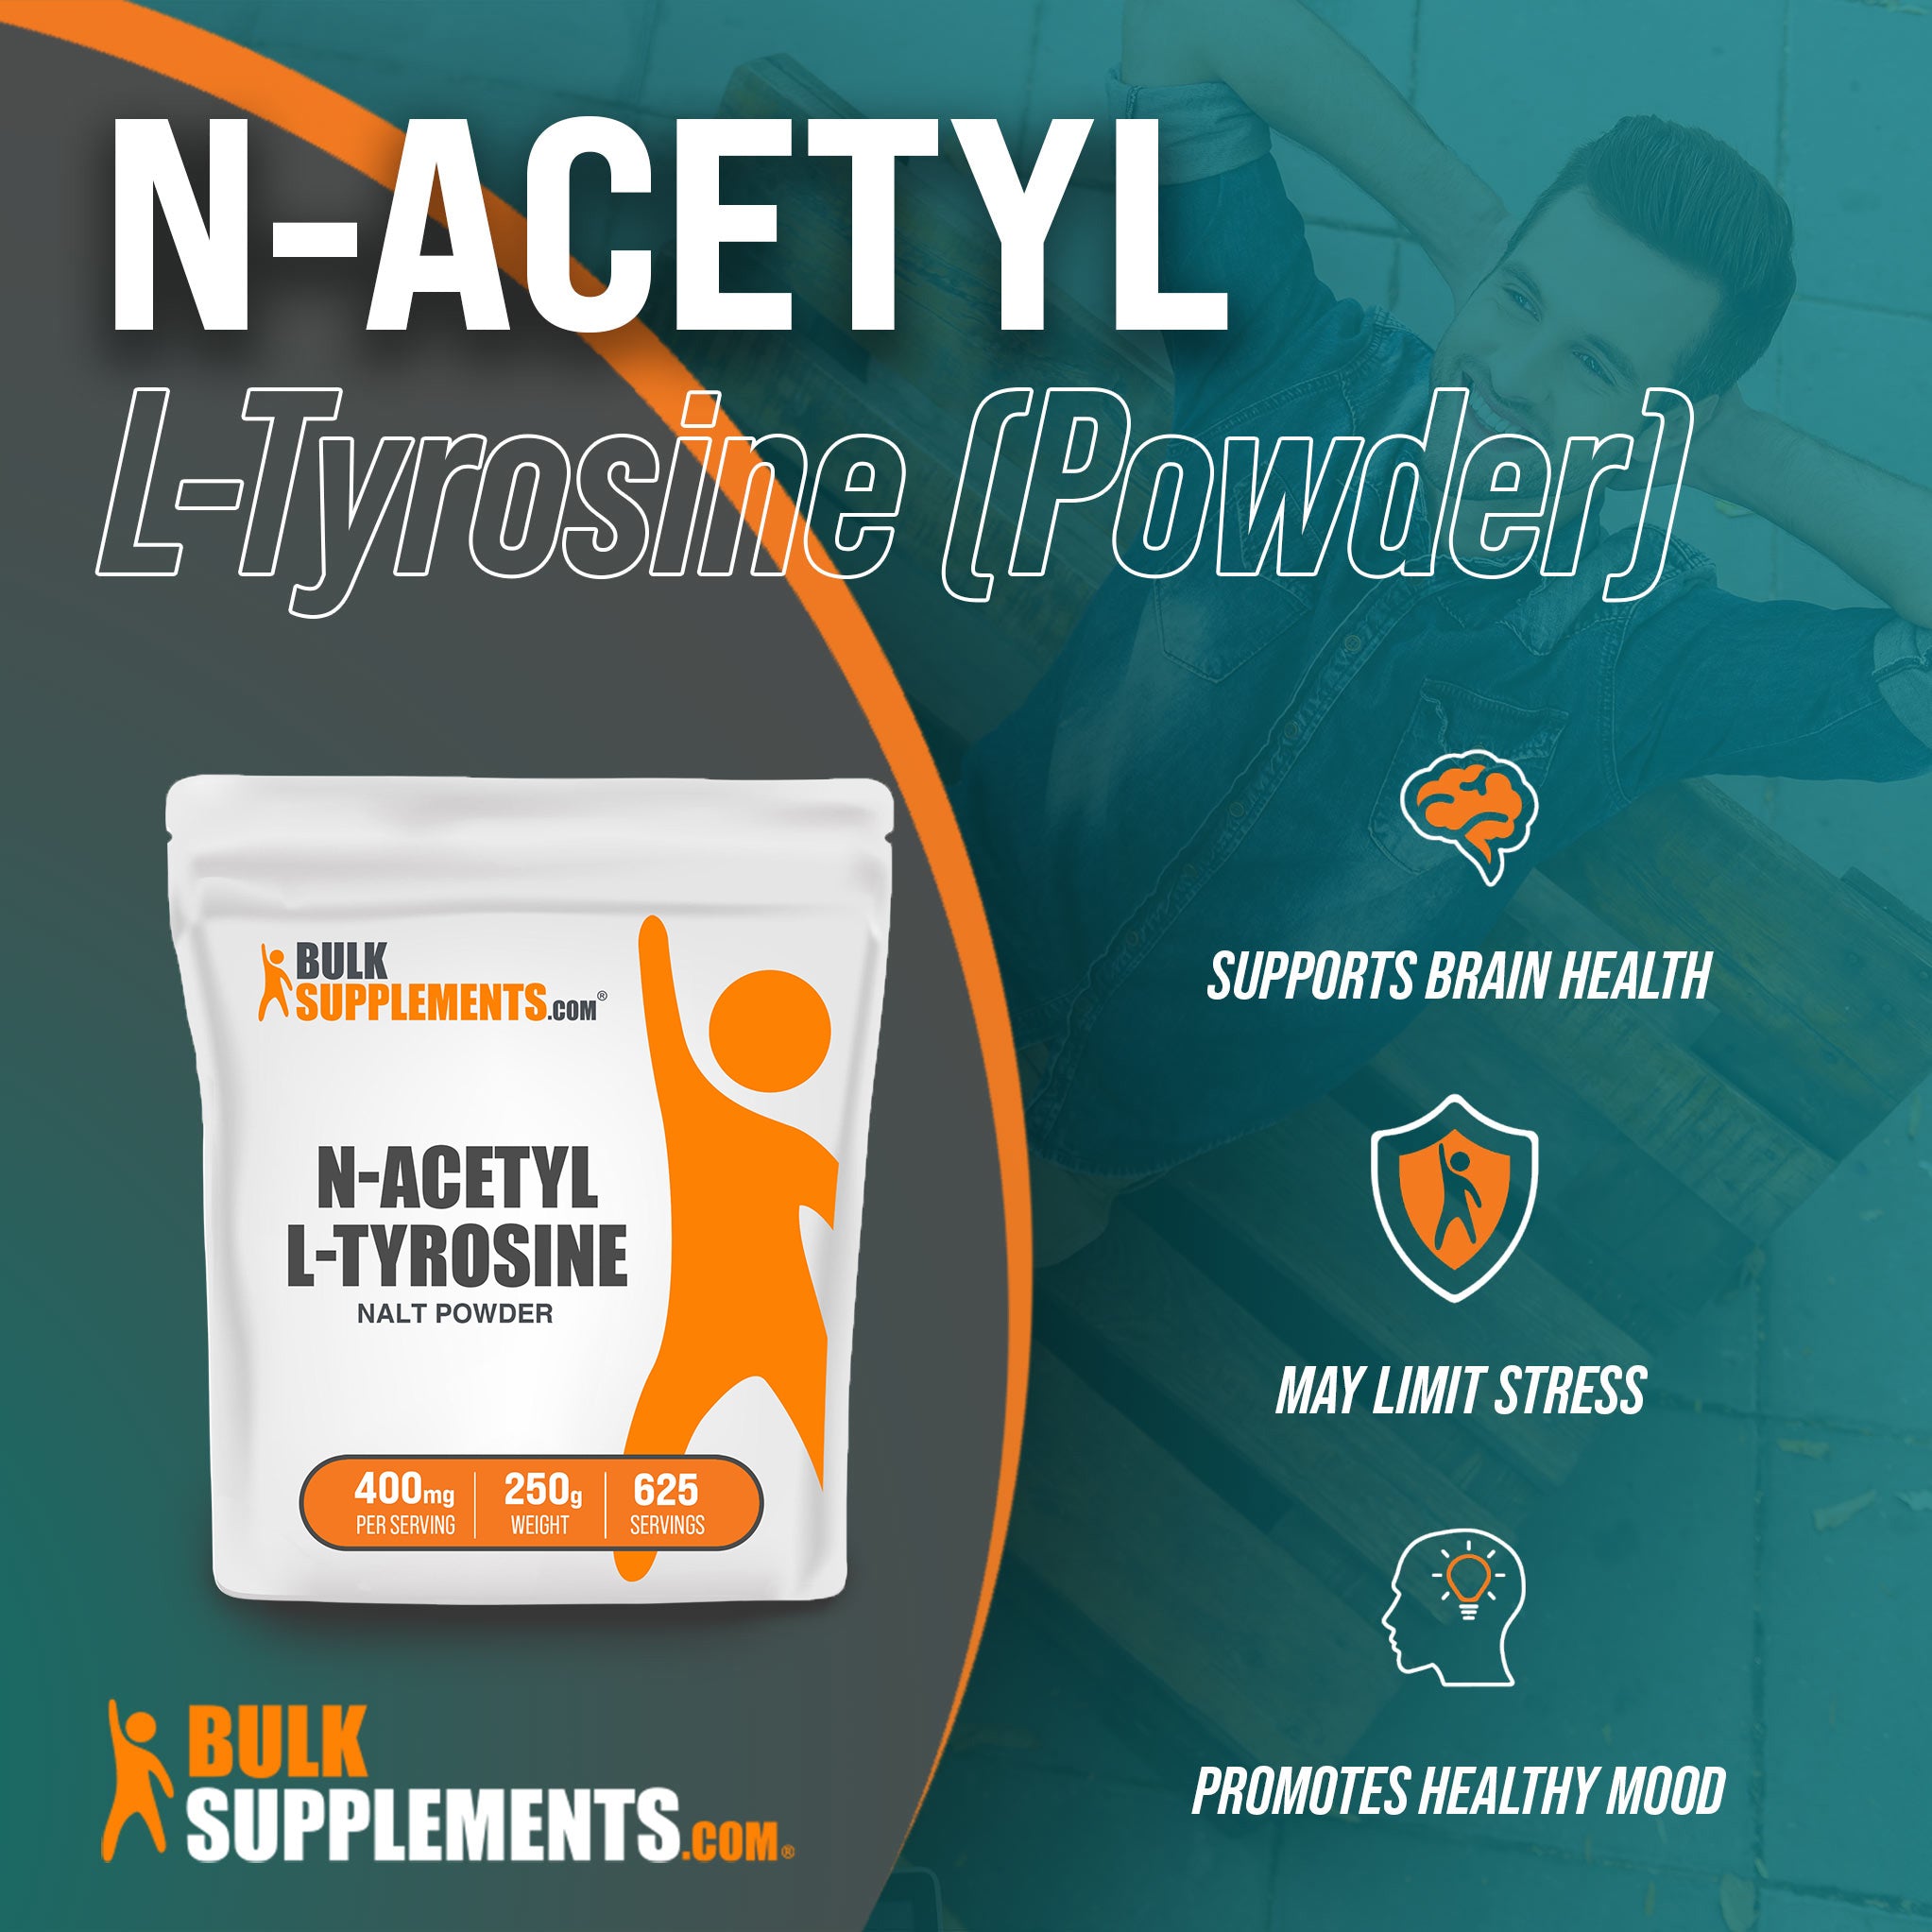 Benefits of N-Acetyl L-Tyrosine: supports brain health, may limit stress, promotes healthy mood